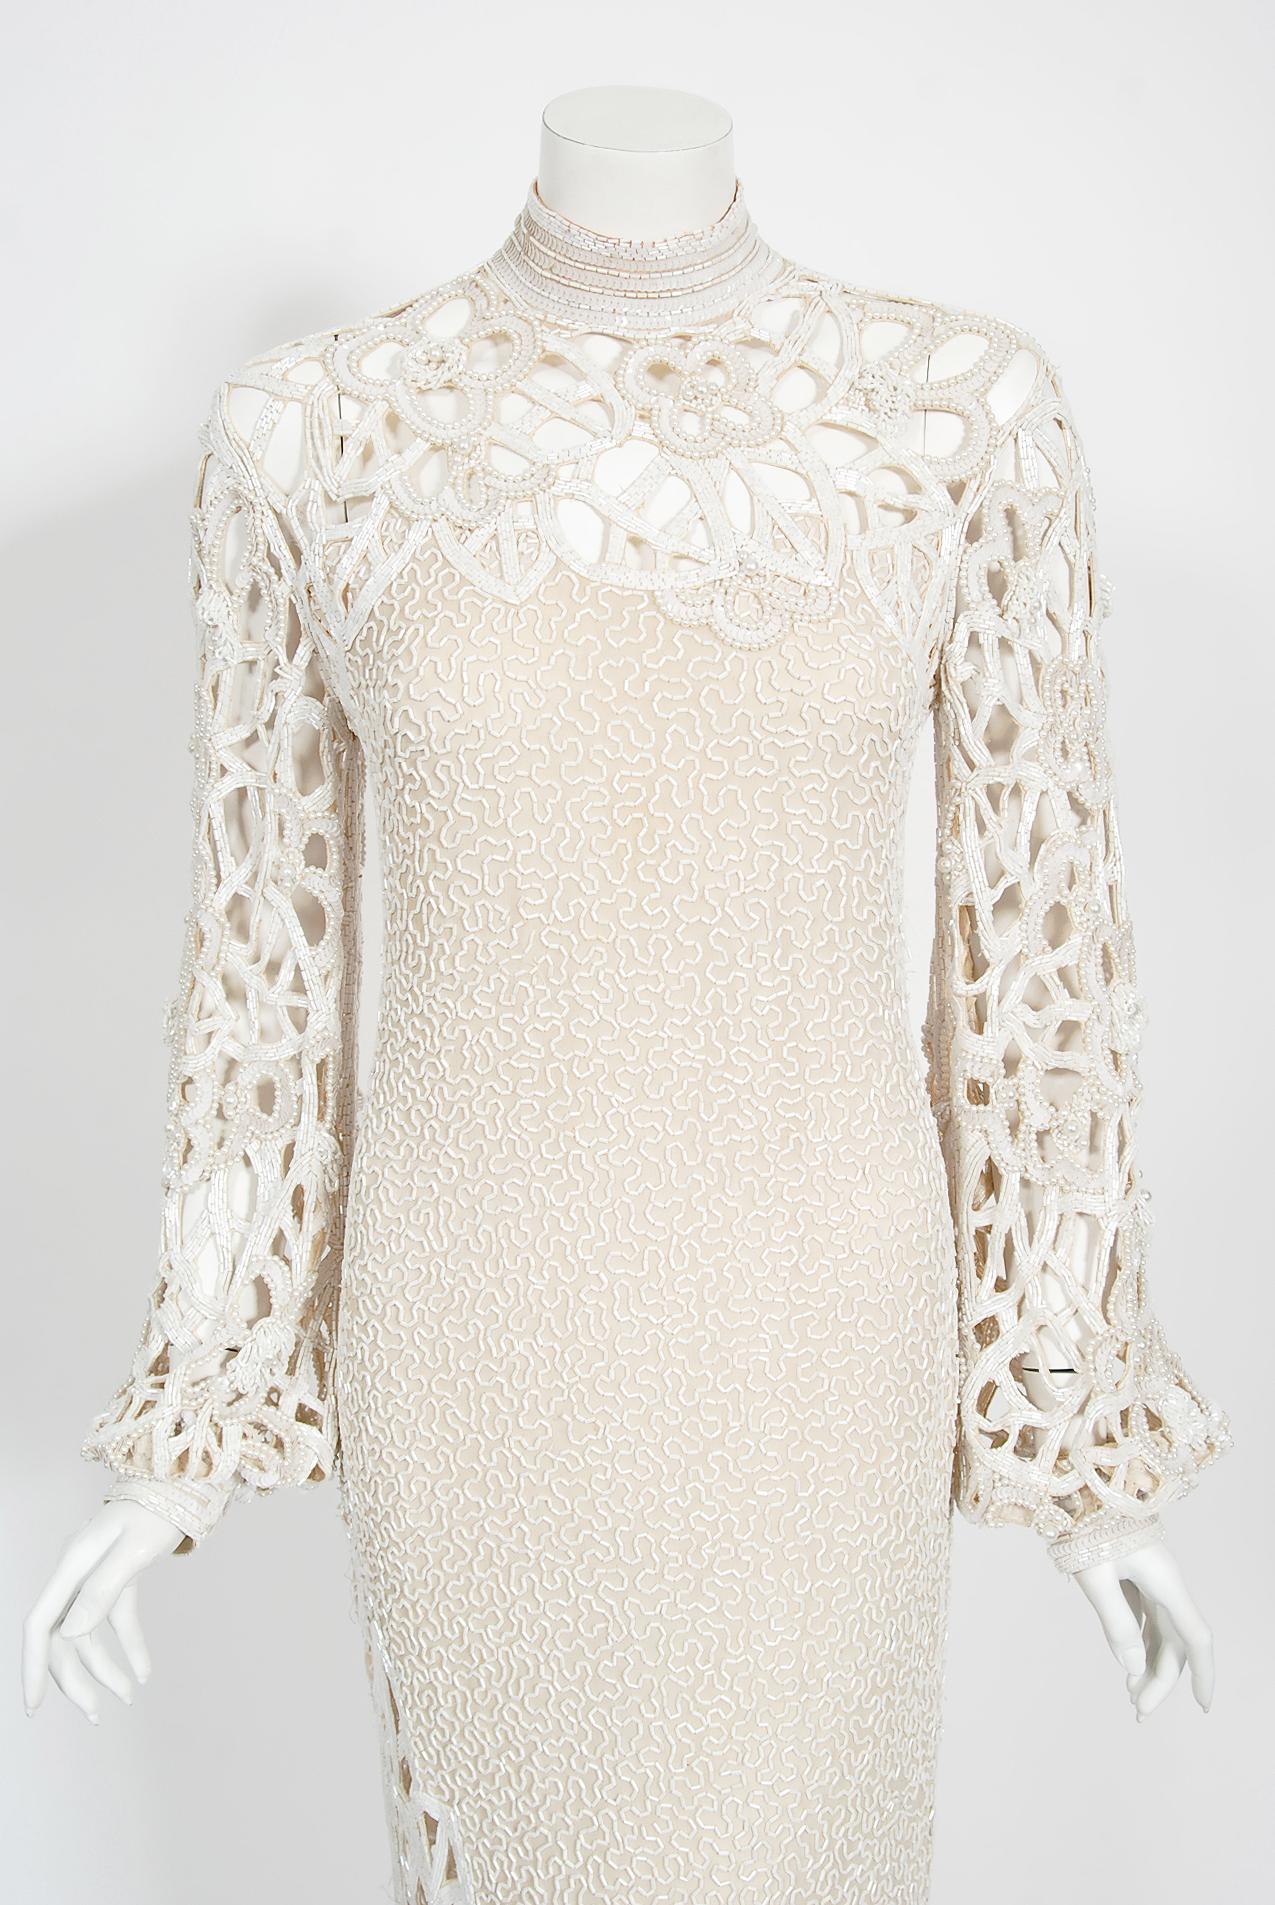 An ultra chic and totally unique Naeem Khan fully-beaded ivory silk gown dating back to the early 1980's. In 1978, Khan moved to the United States to apprentice for legendary American designer Halston. During this time, he mastered the art of